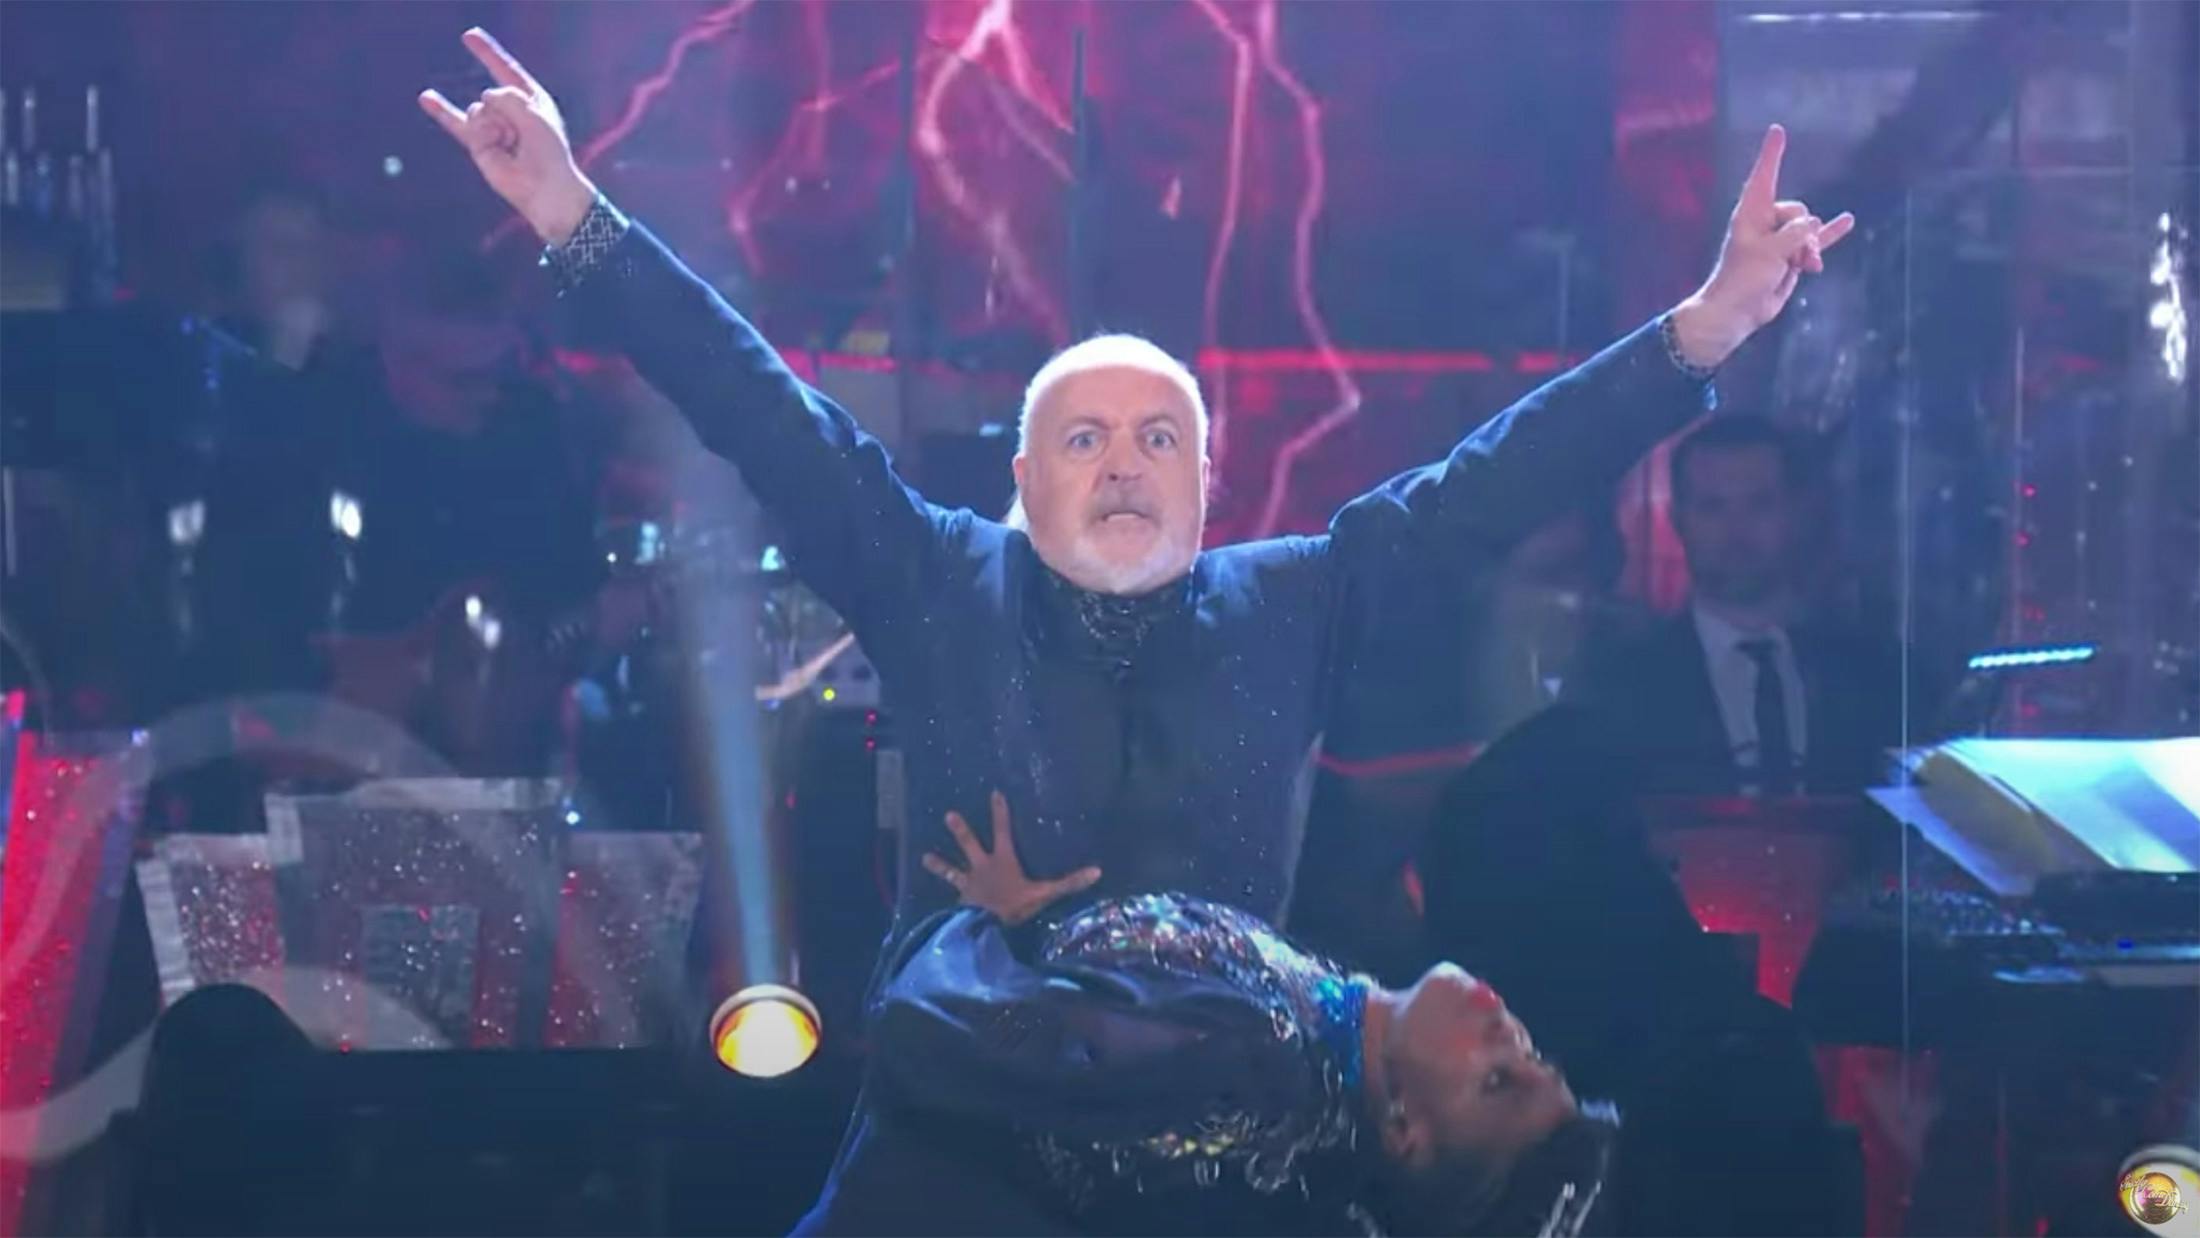 Watch Bill Bailey dance the tango to Enter Sandman on Strictly Come Dancing